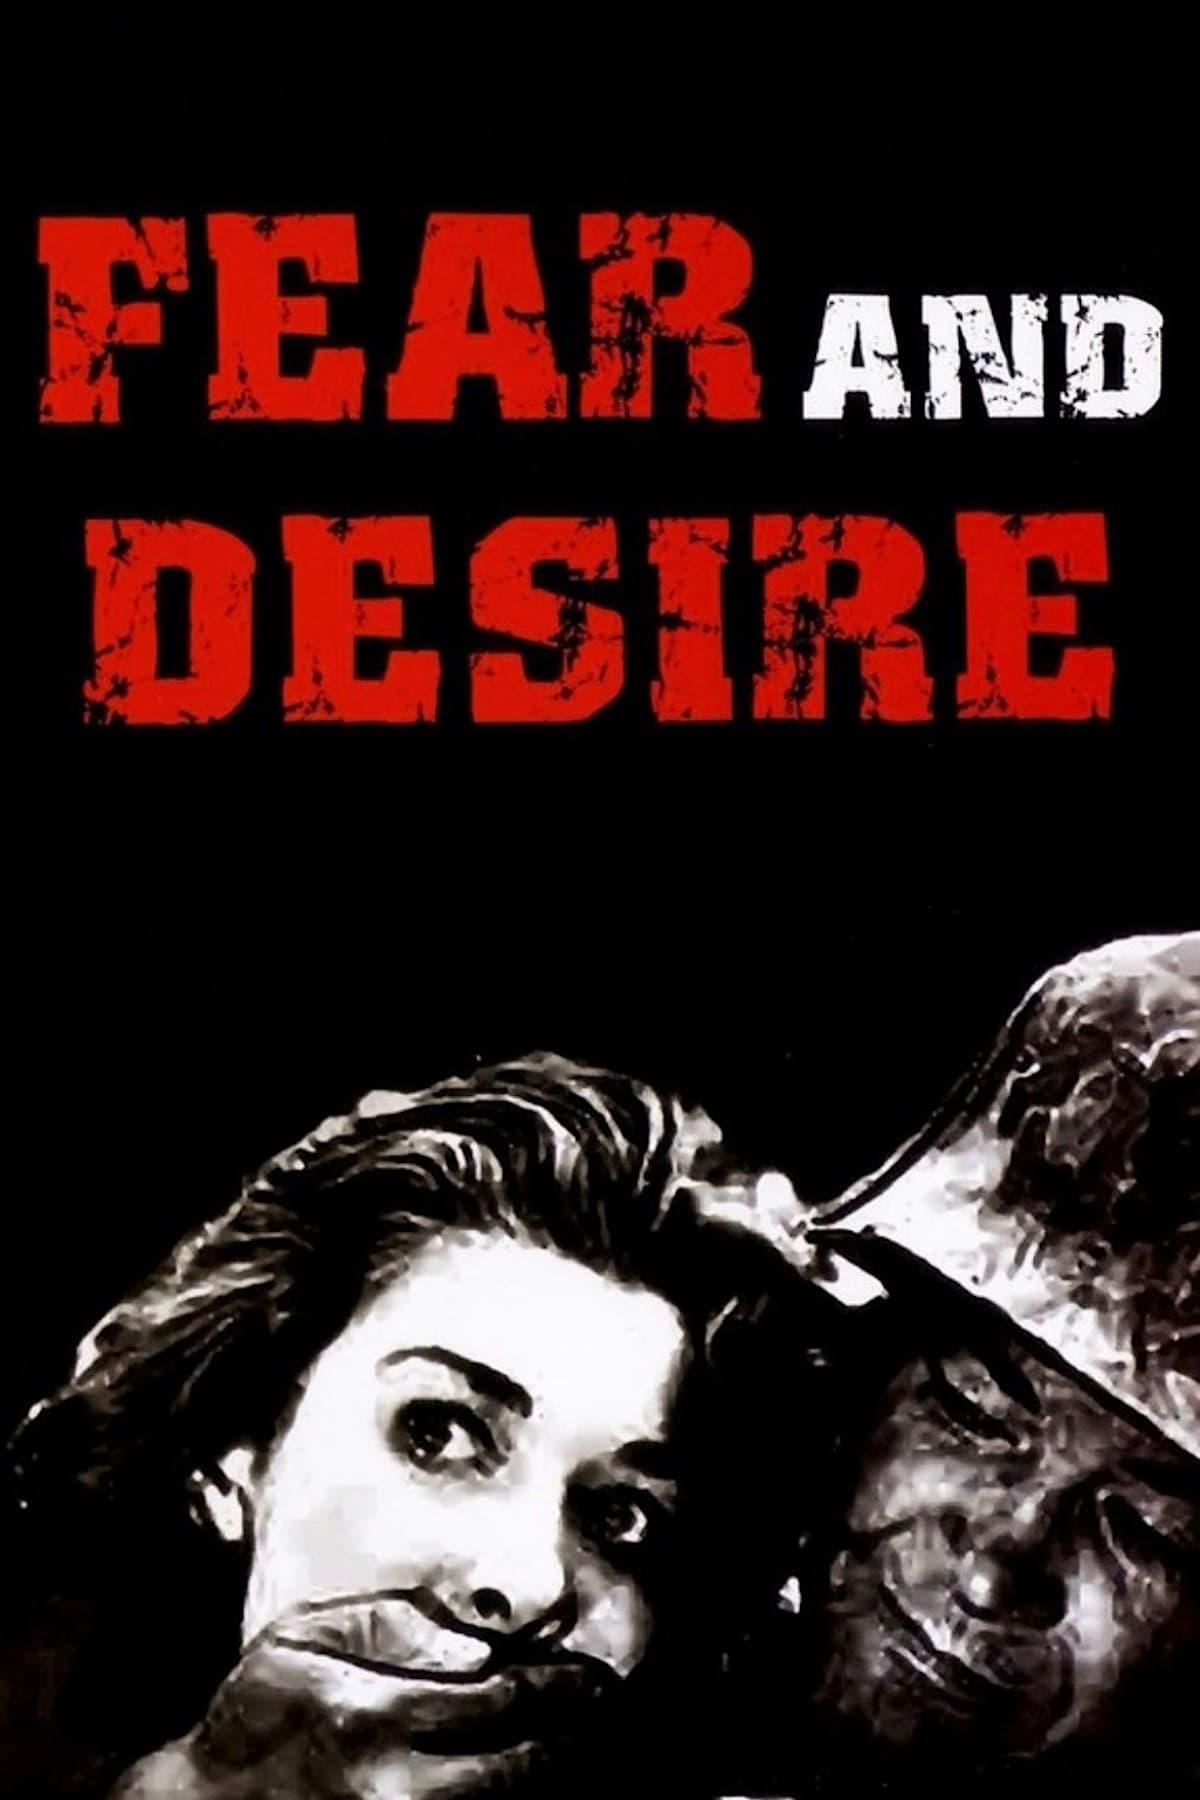 Fear and Desire poster